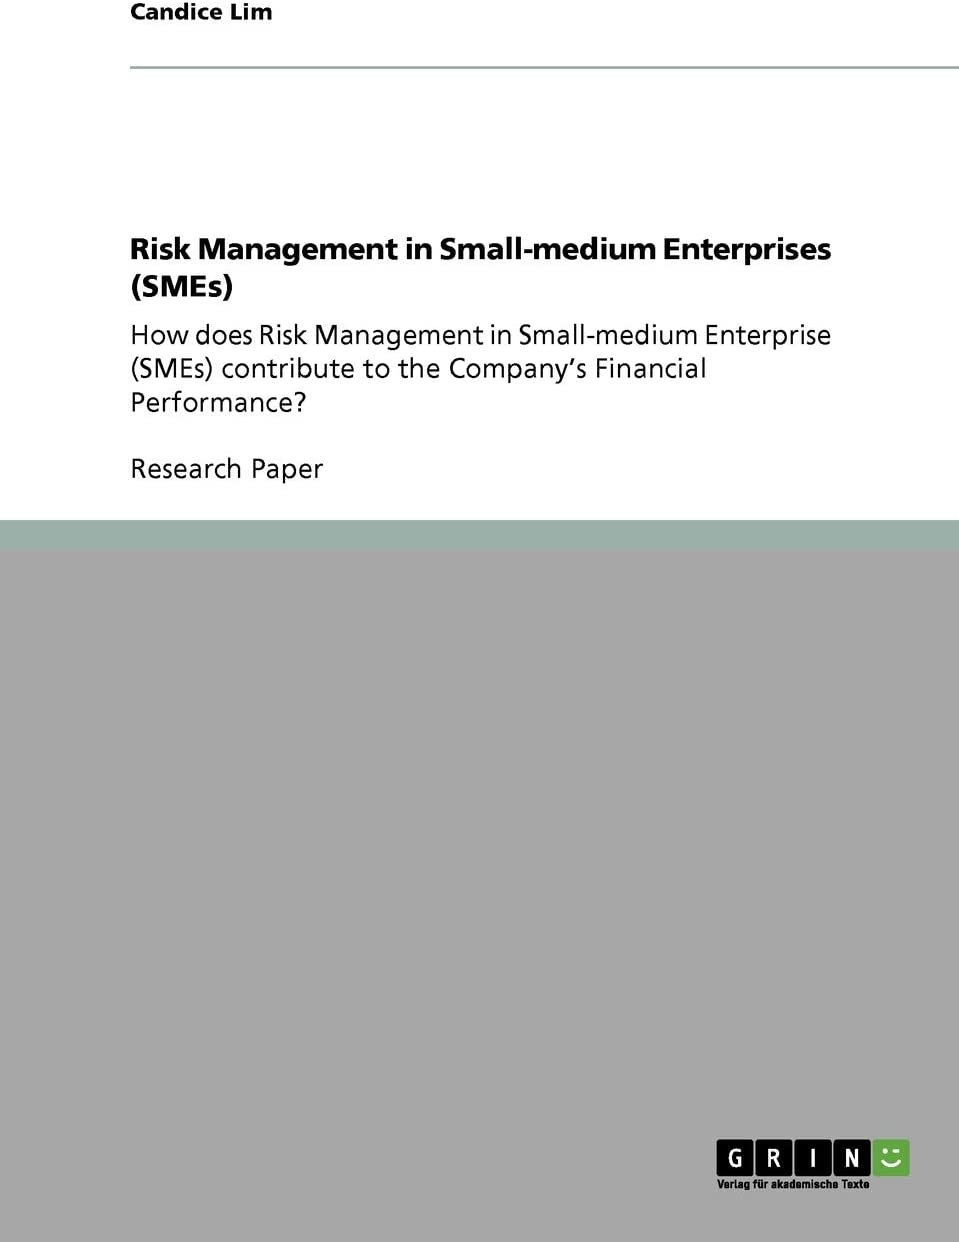 Risk Management in Small-medium Enterprises (SMEs): How does Risk Management in Small-medium Enterprise (SMEs) contribute to the Company's Financial Performance?